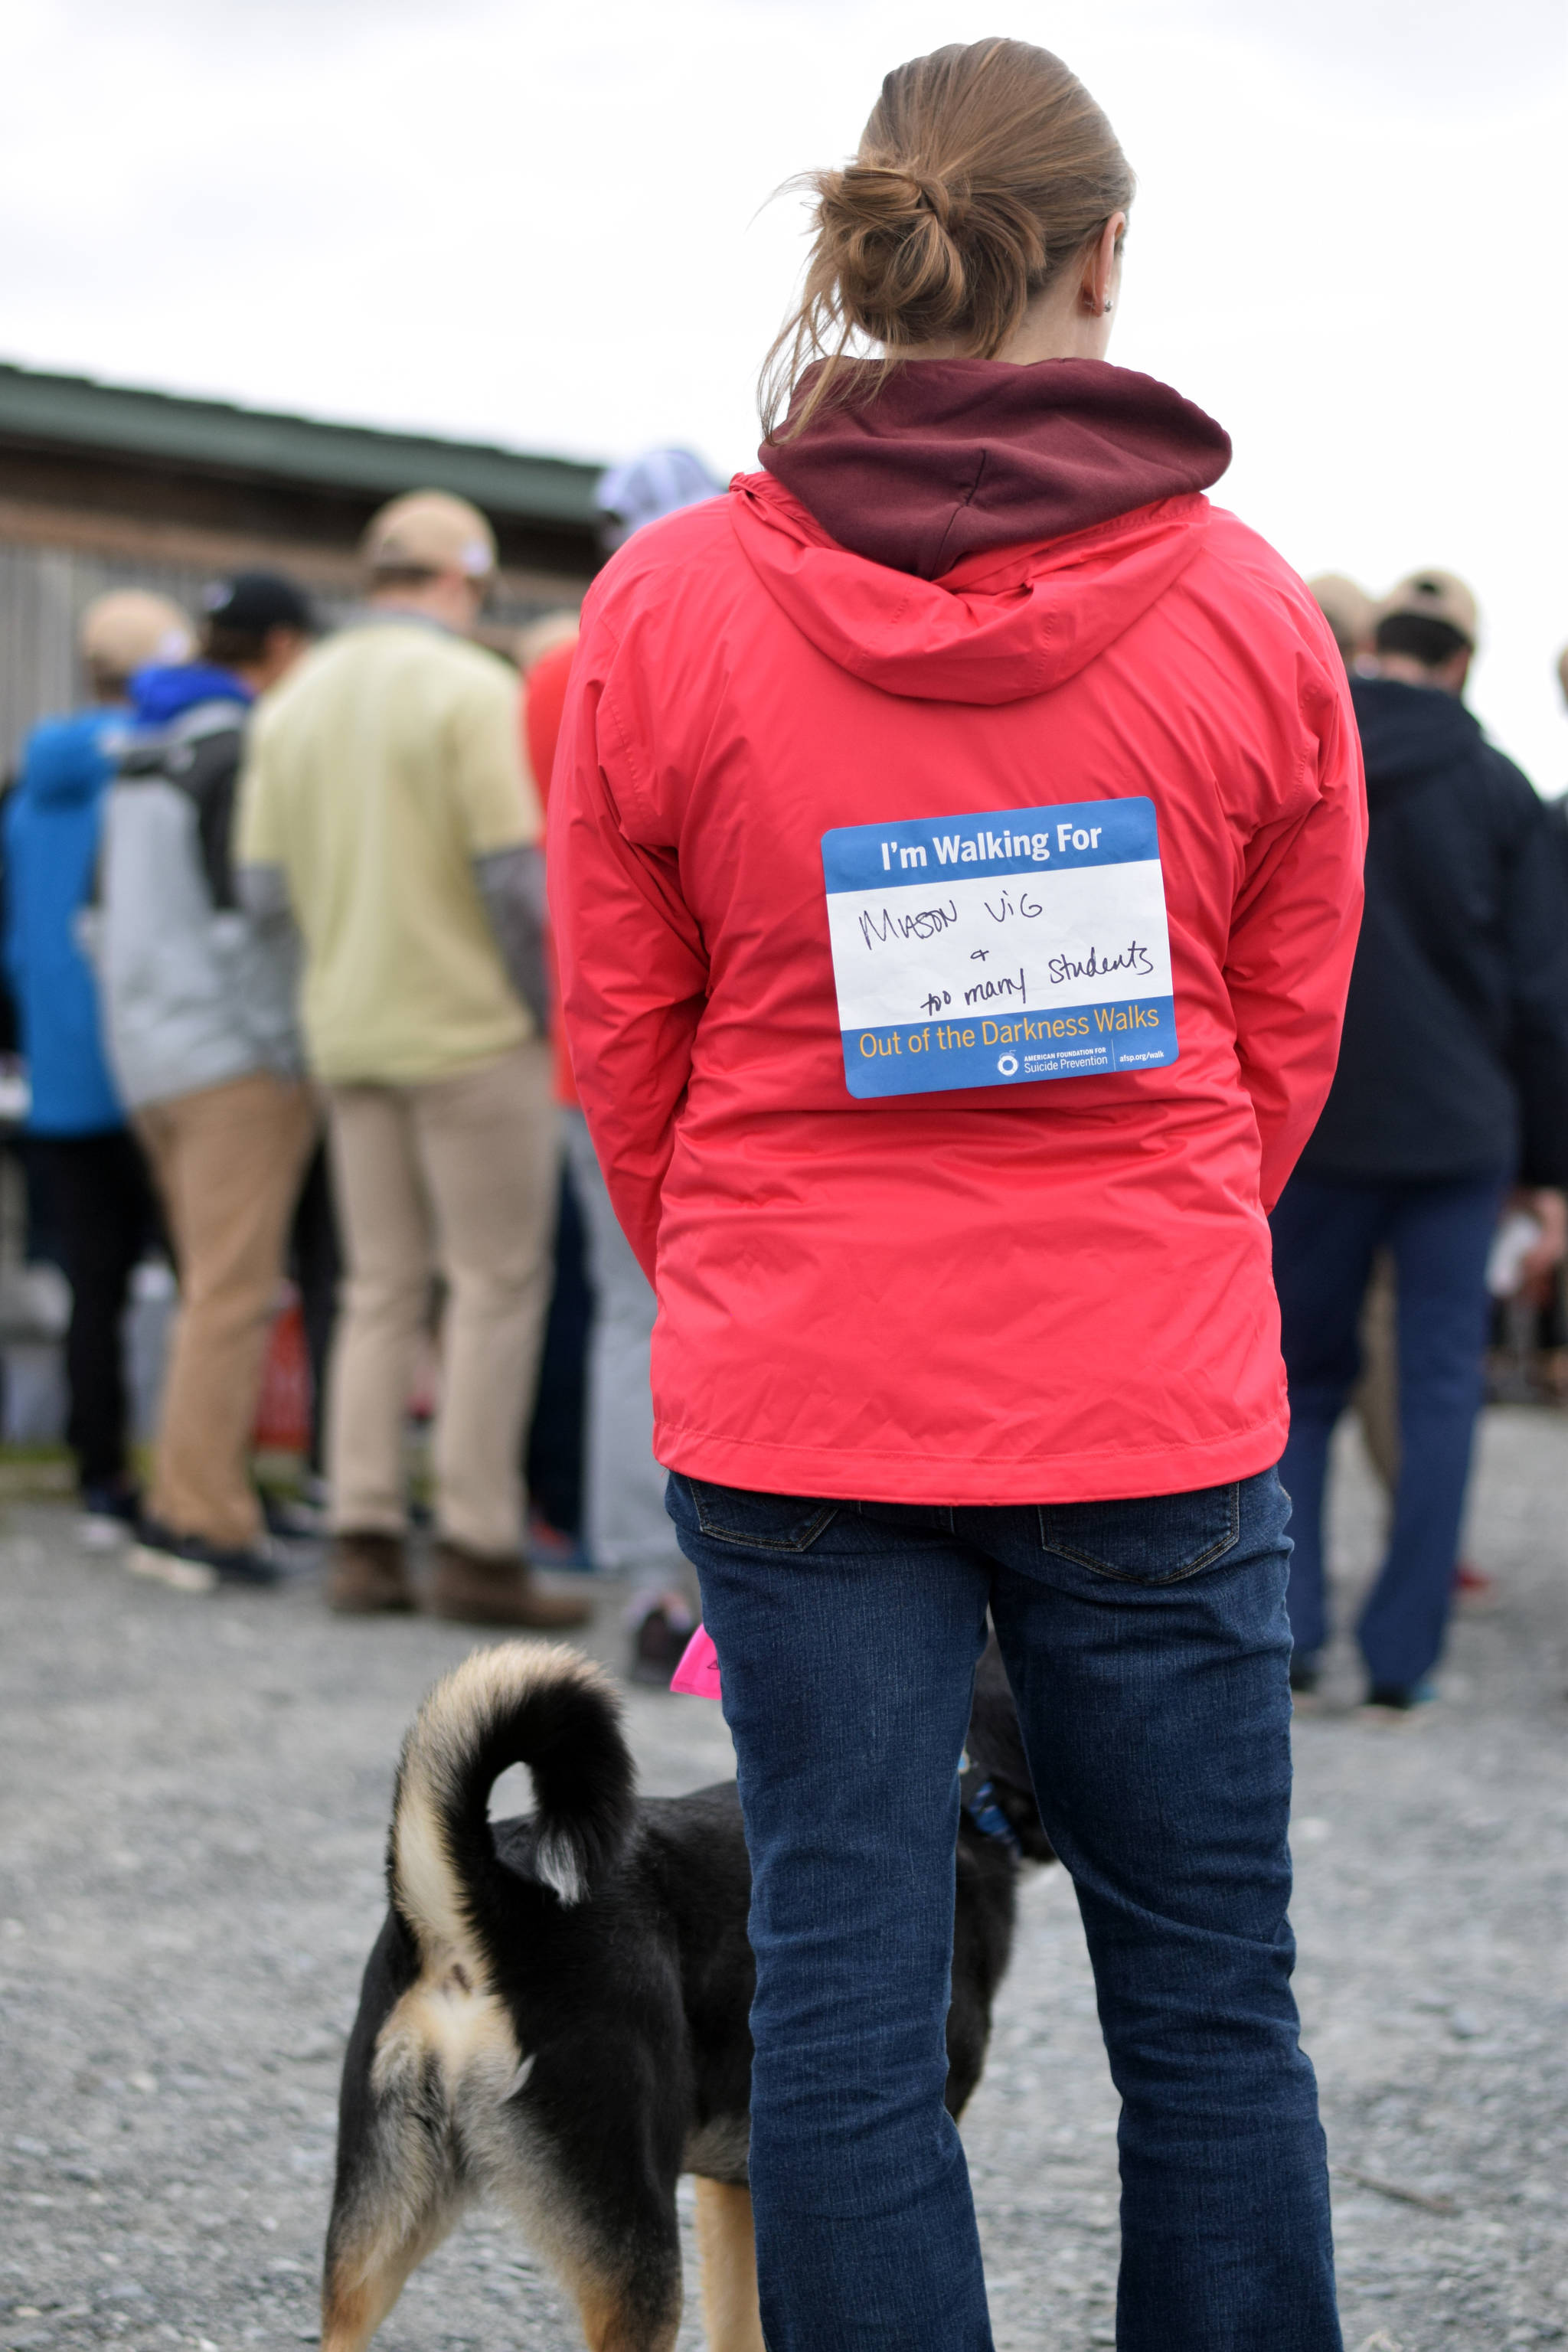 A participant in Sunday’s Out of the Darkness Kenai Walk adorned a bib saying who she was walking for — Mason Vig and too many students. The walk started at the Kenaitze Fishery Site in Kenai, Alaska and continued down the beach for one mile. (Photo by Kat Sorensen/Peninsula Clarion)